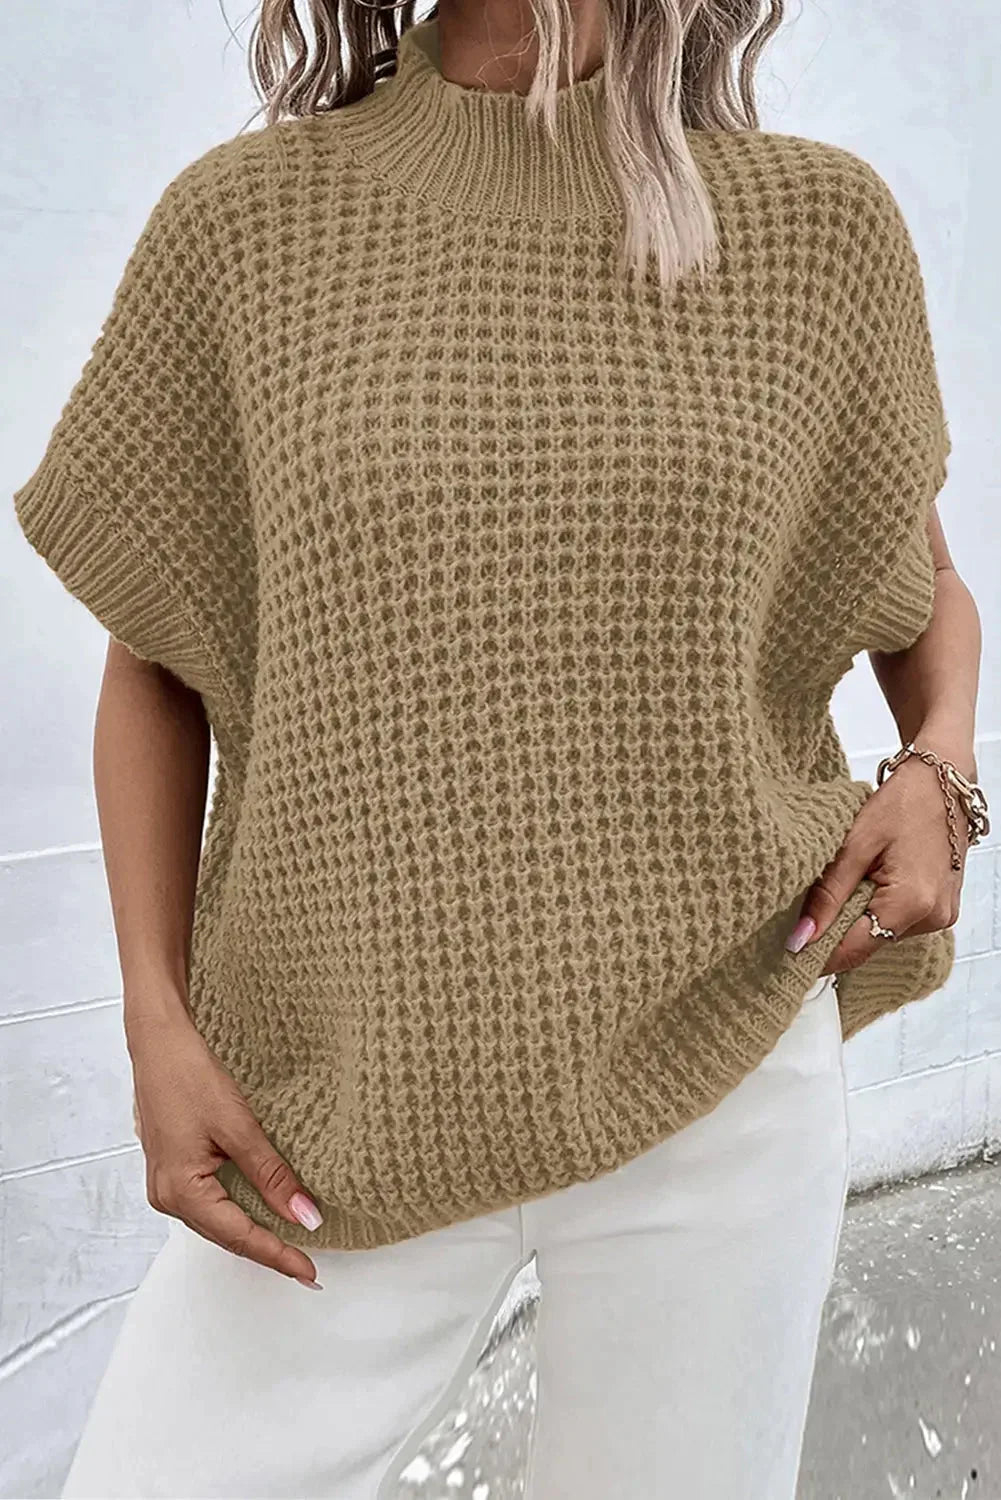 Light french beige high neck short batwing sleeve textured knit sweater - l / 100% acrylic - sweaters & cardigans